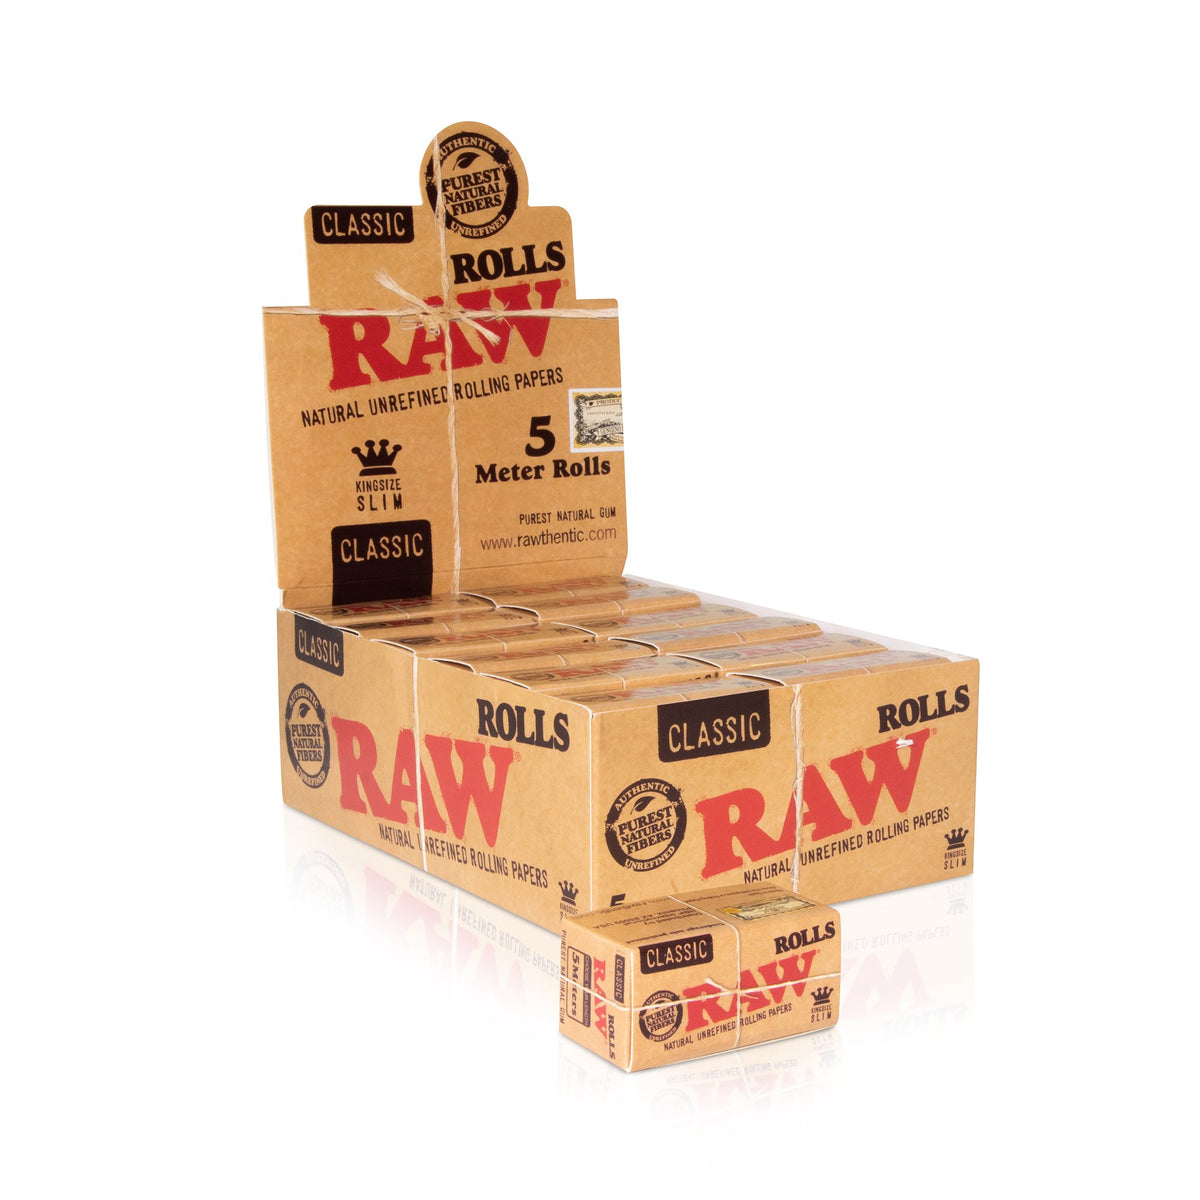 RAW Classic Paper Rolls King Size Slim - 5 Meters Rolling Papers WAR00344-MUSA01 esd-official